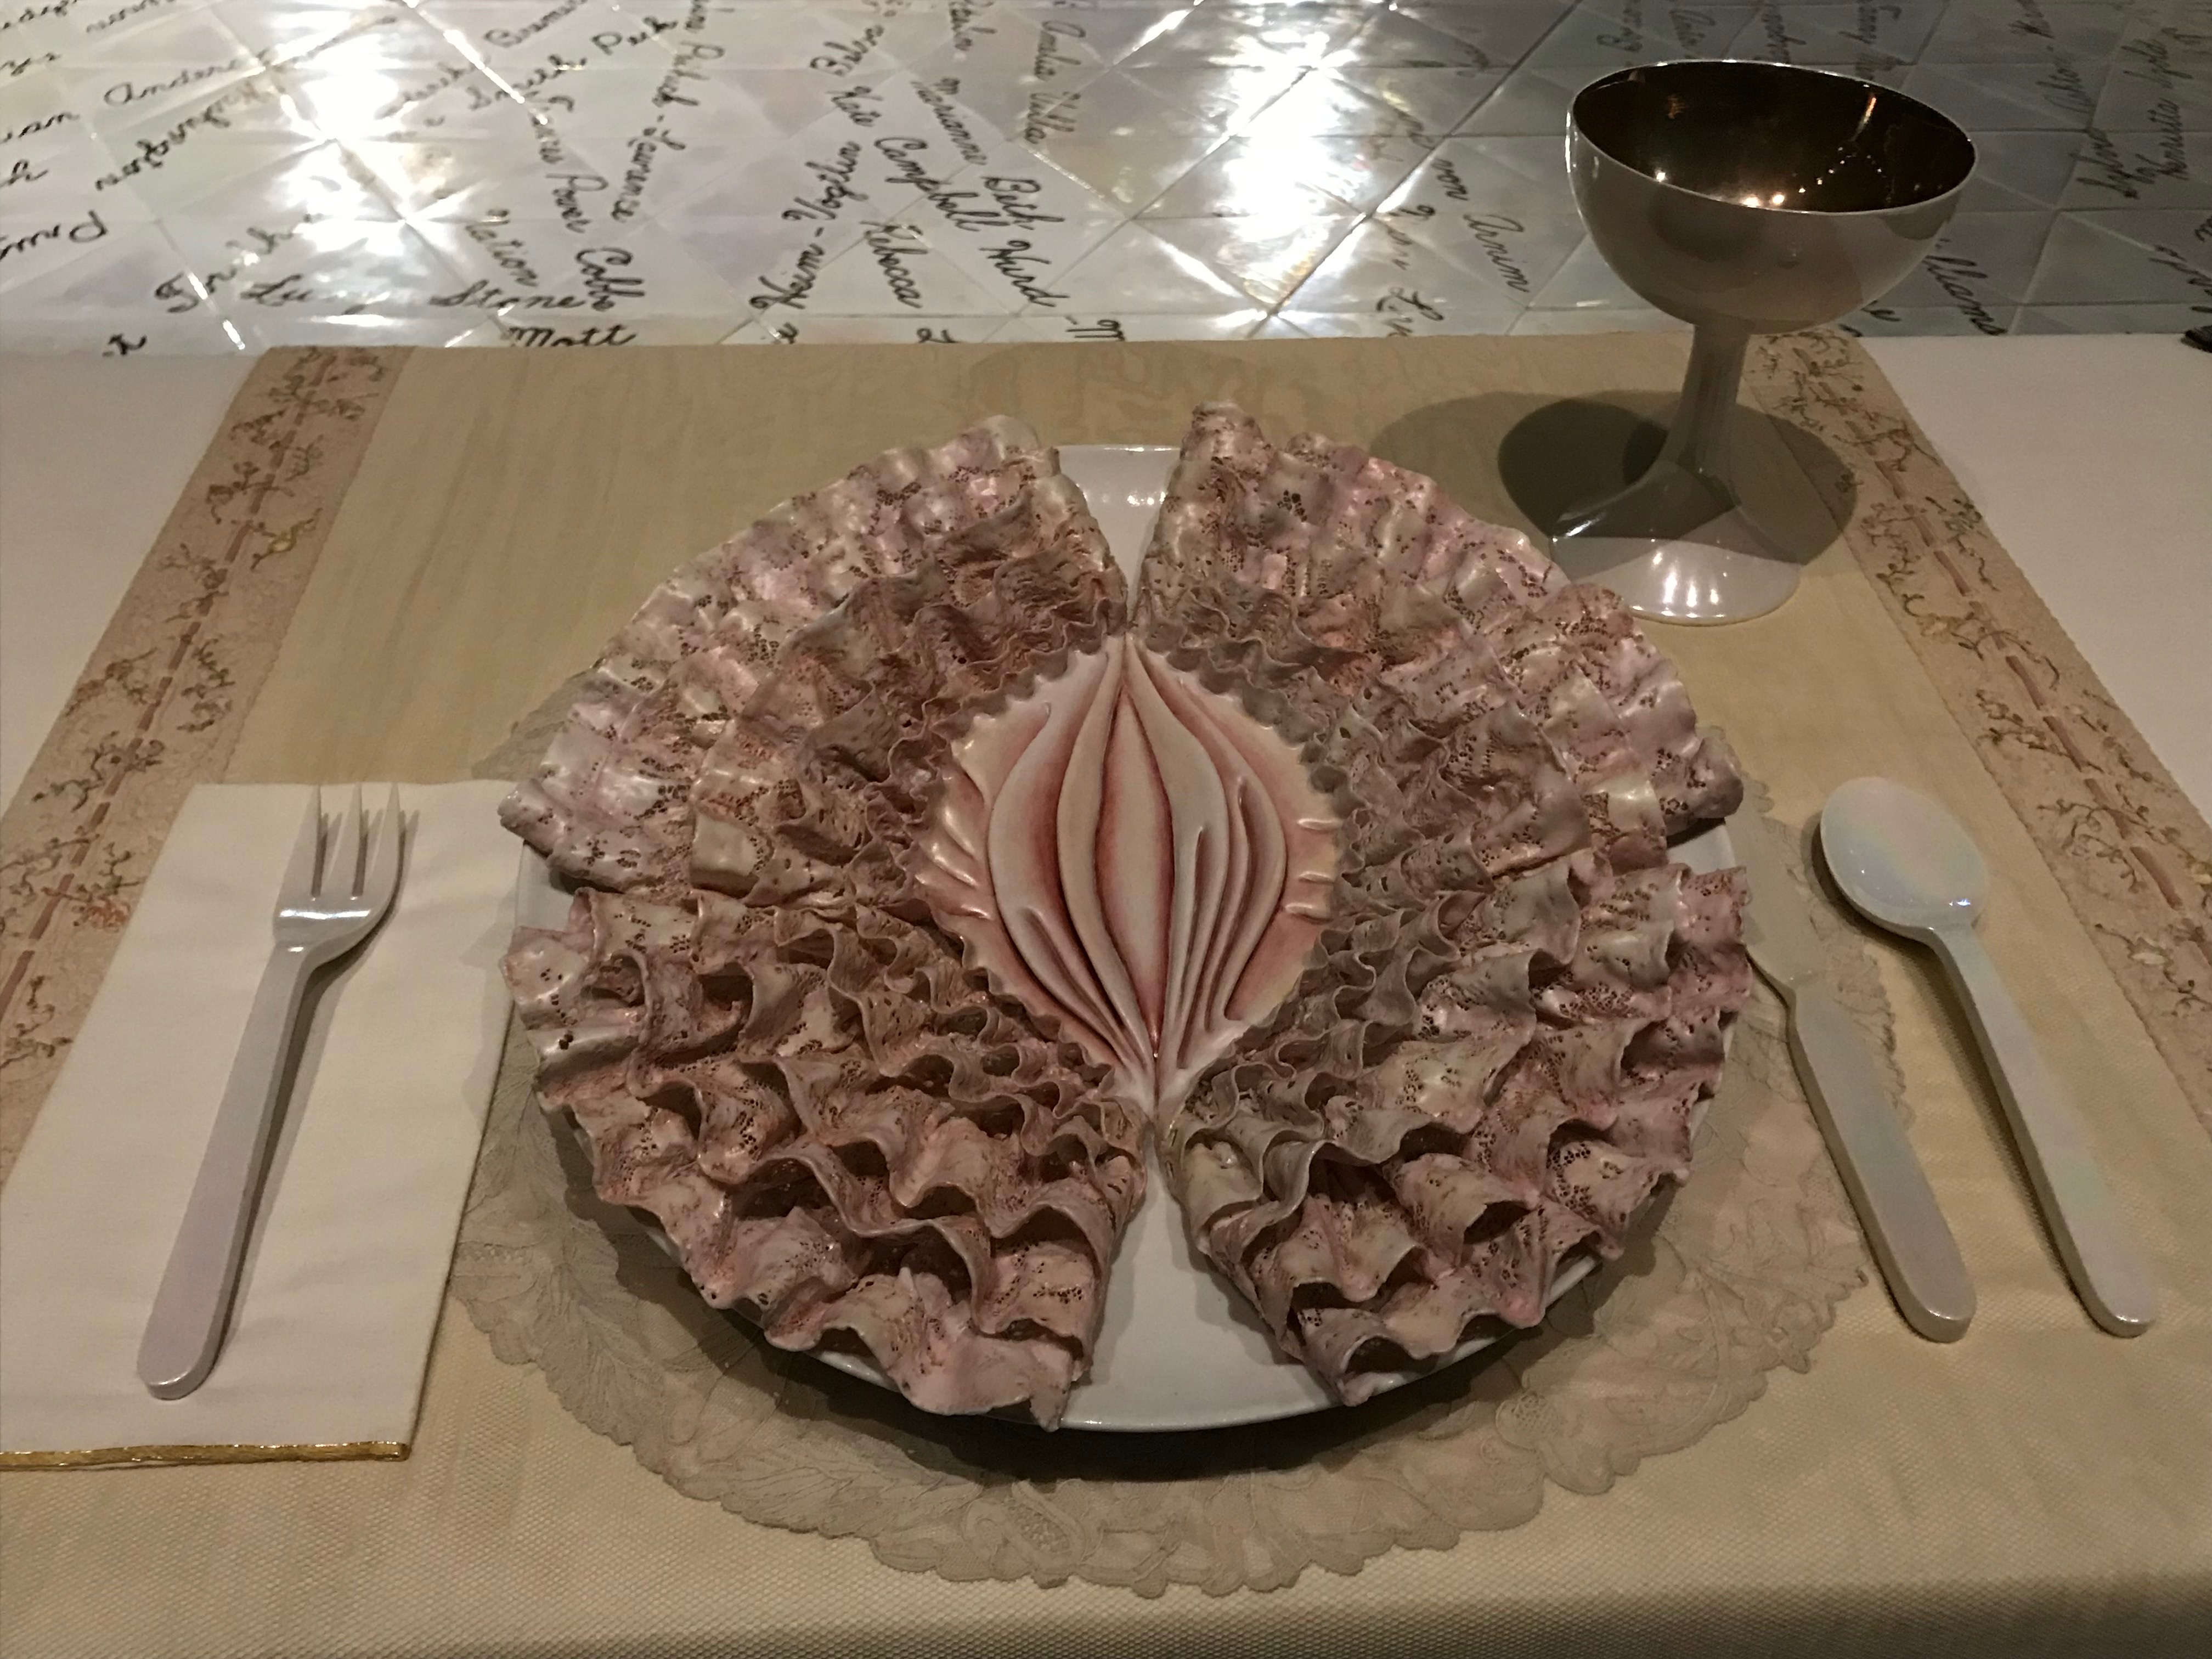 A place setting at The Dinner Party Exhibit at the Elizabeth A. Sackler Center for Feminist Art at the Brooklyn Museum in New York City. (DCNF/Ethan Barton)